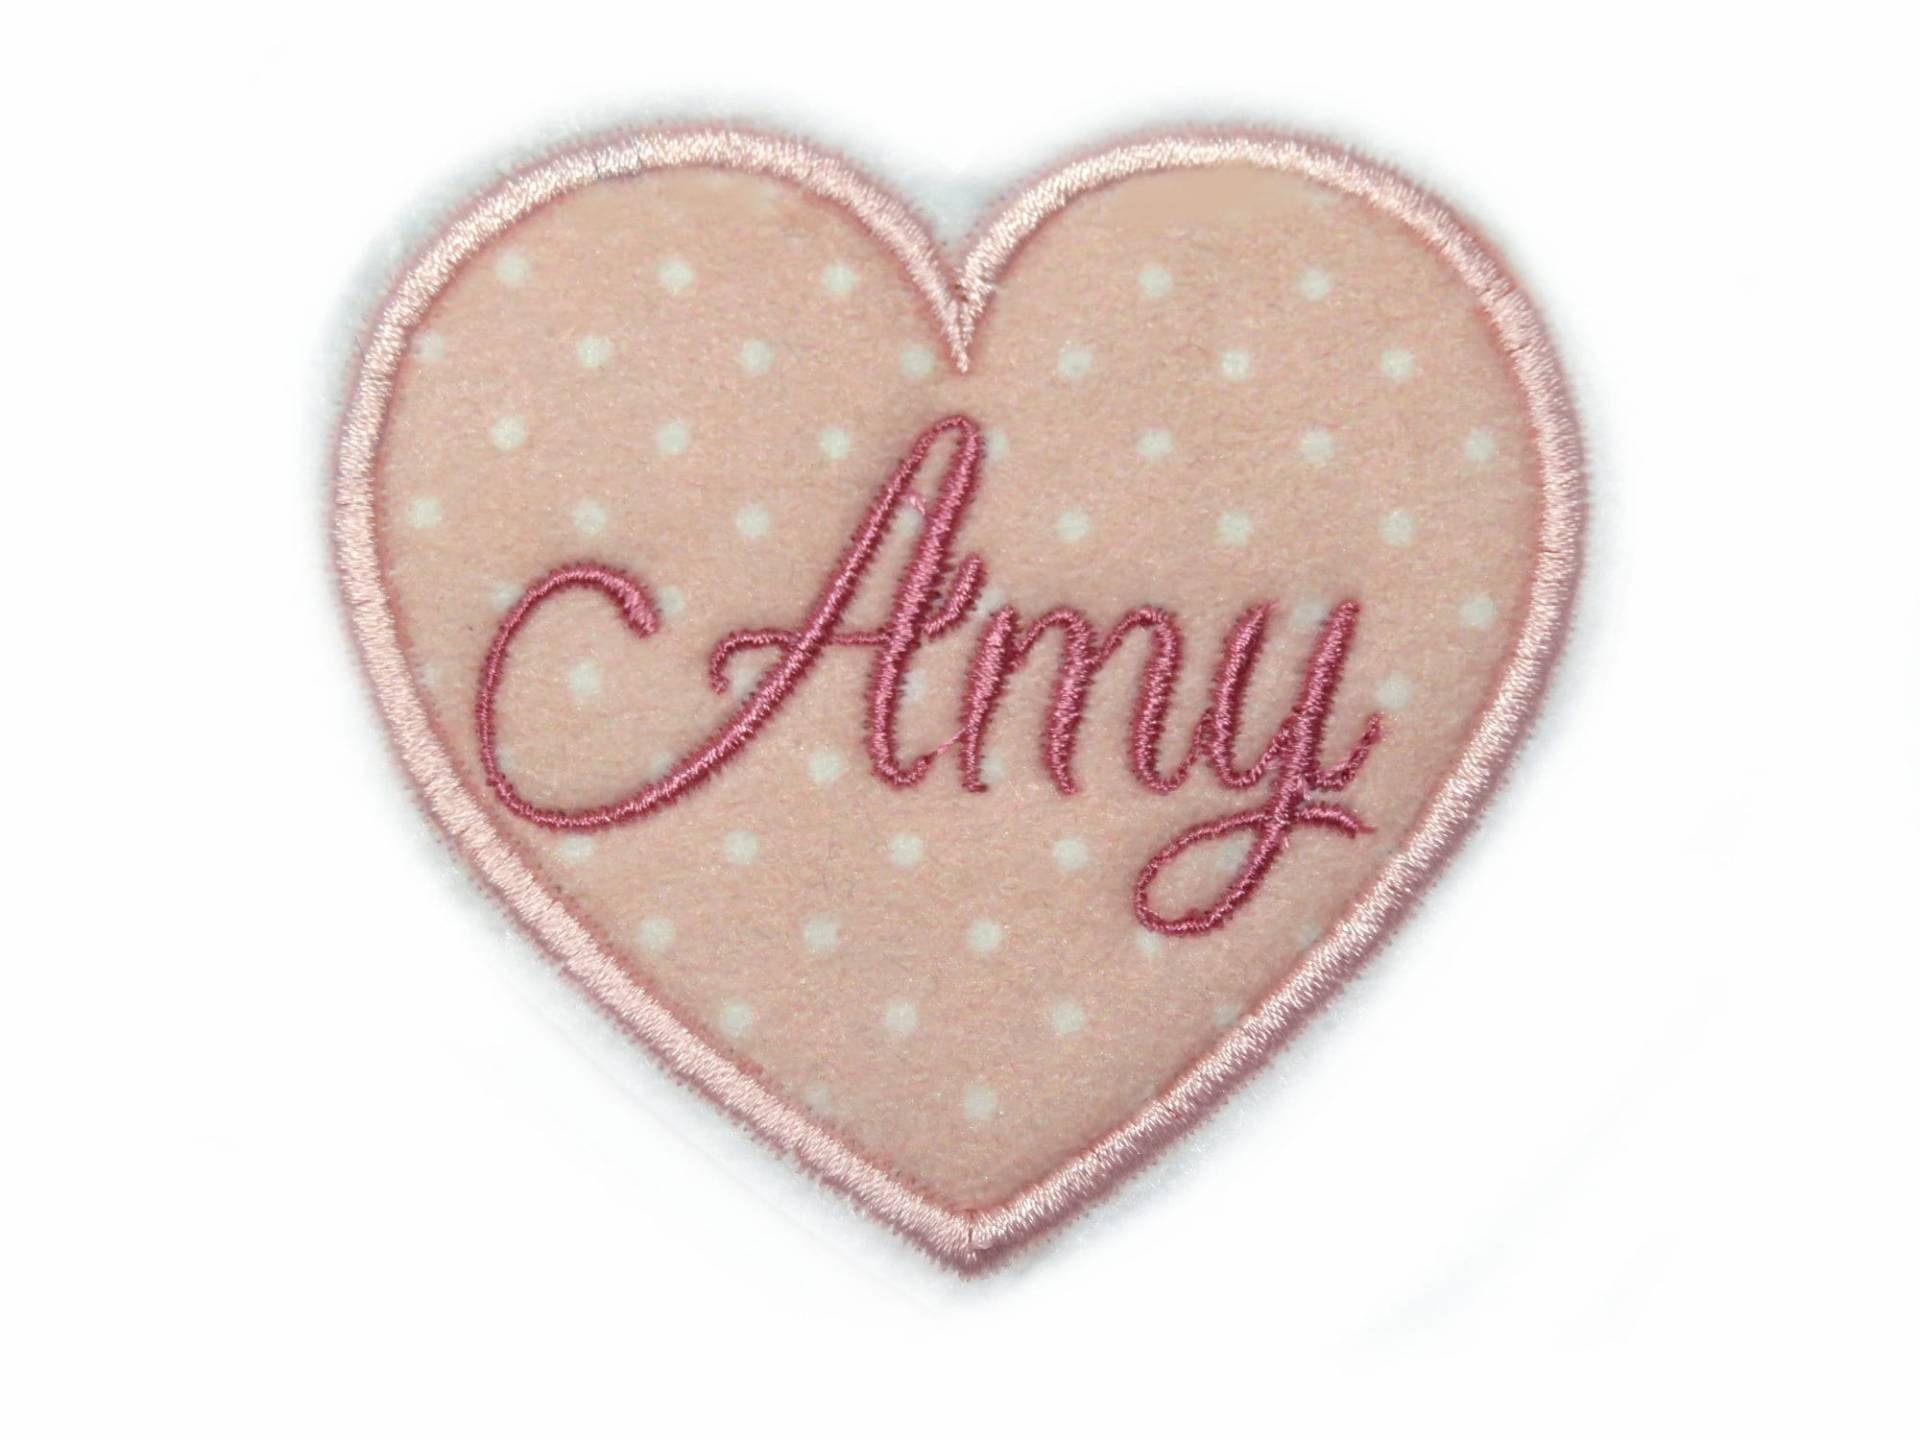 Name Tag Patch Application Iron-On For Children Name Desired Color Choice Monogram von HomeArtist